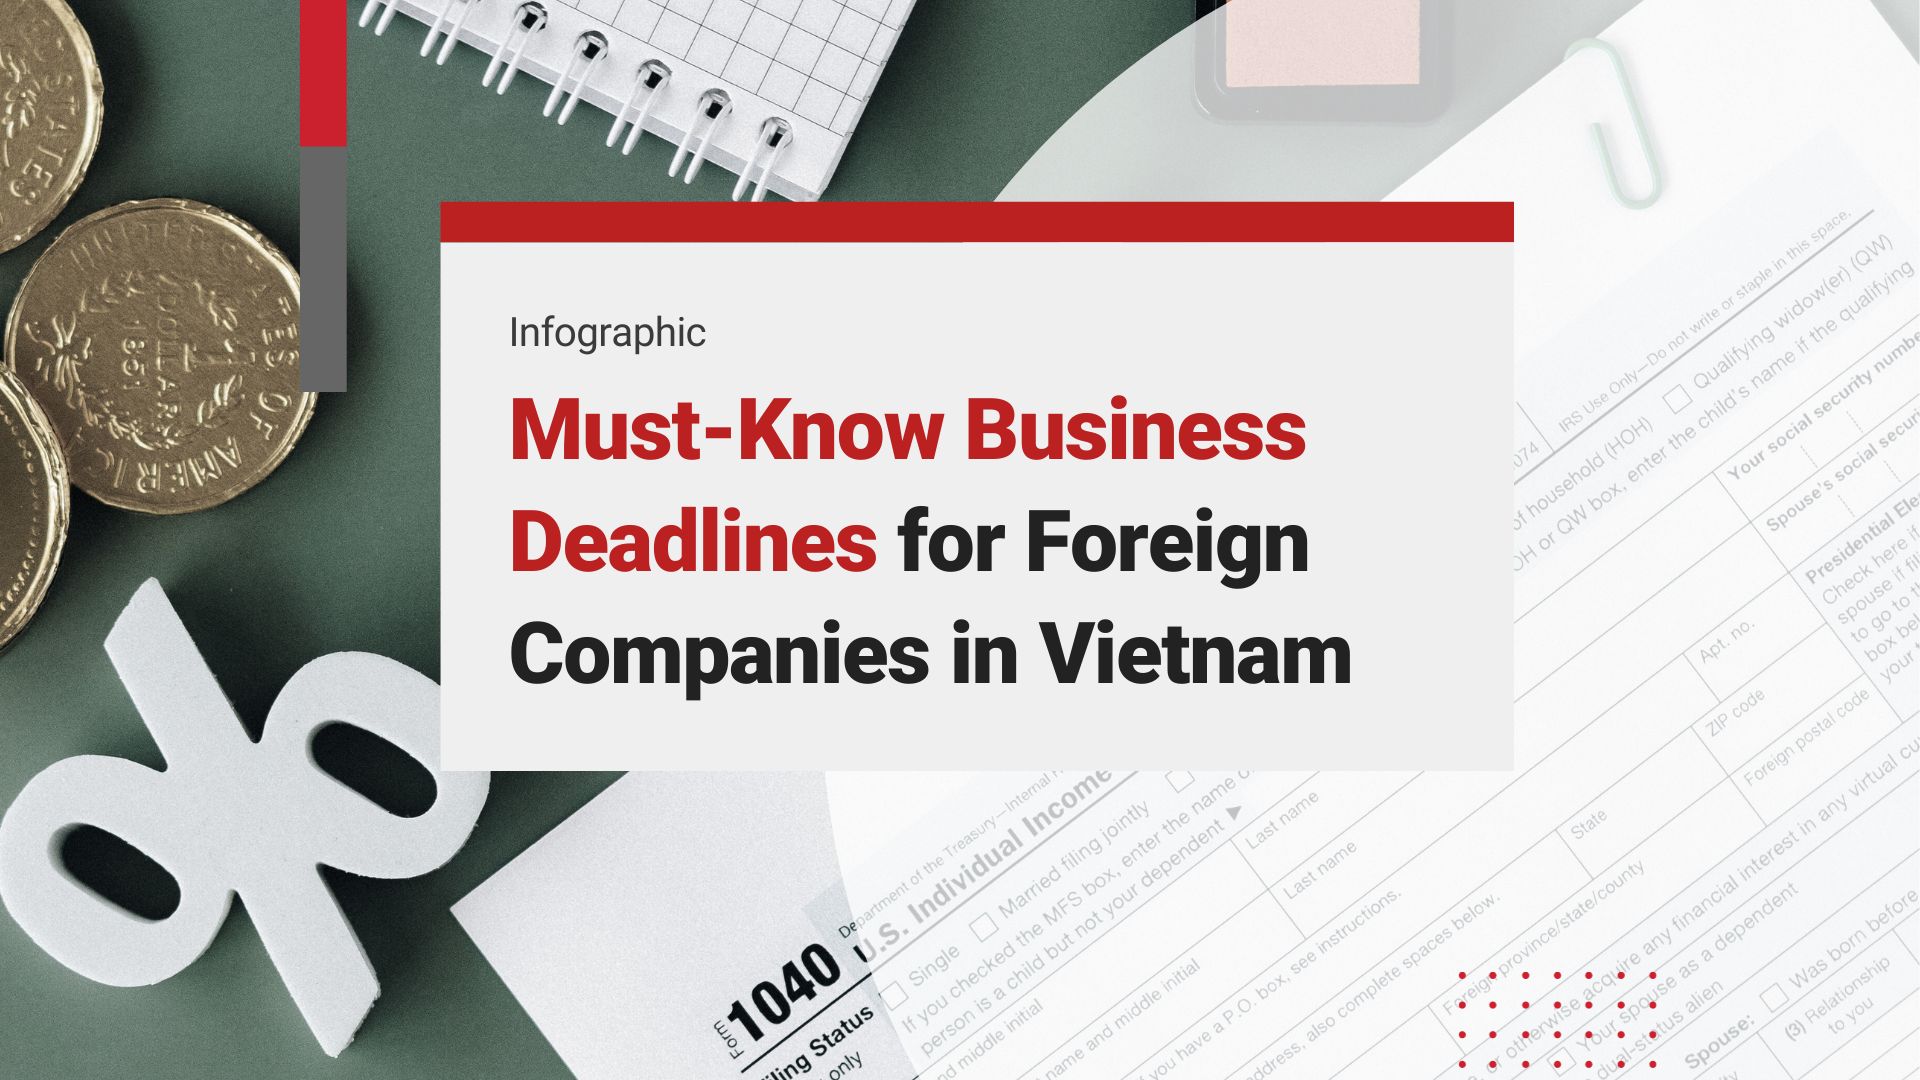 Must-Know Business Deadlines for Foreign Companies in Vietnam